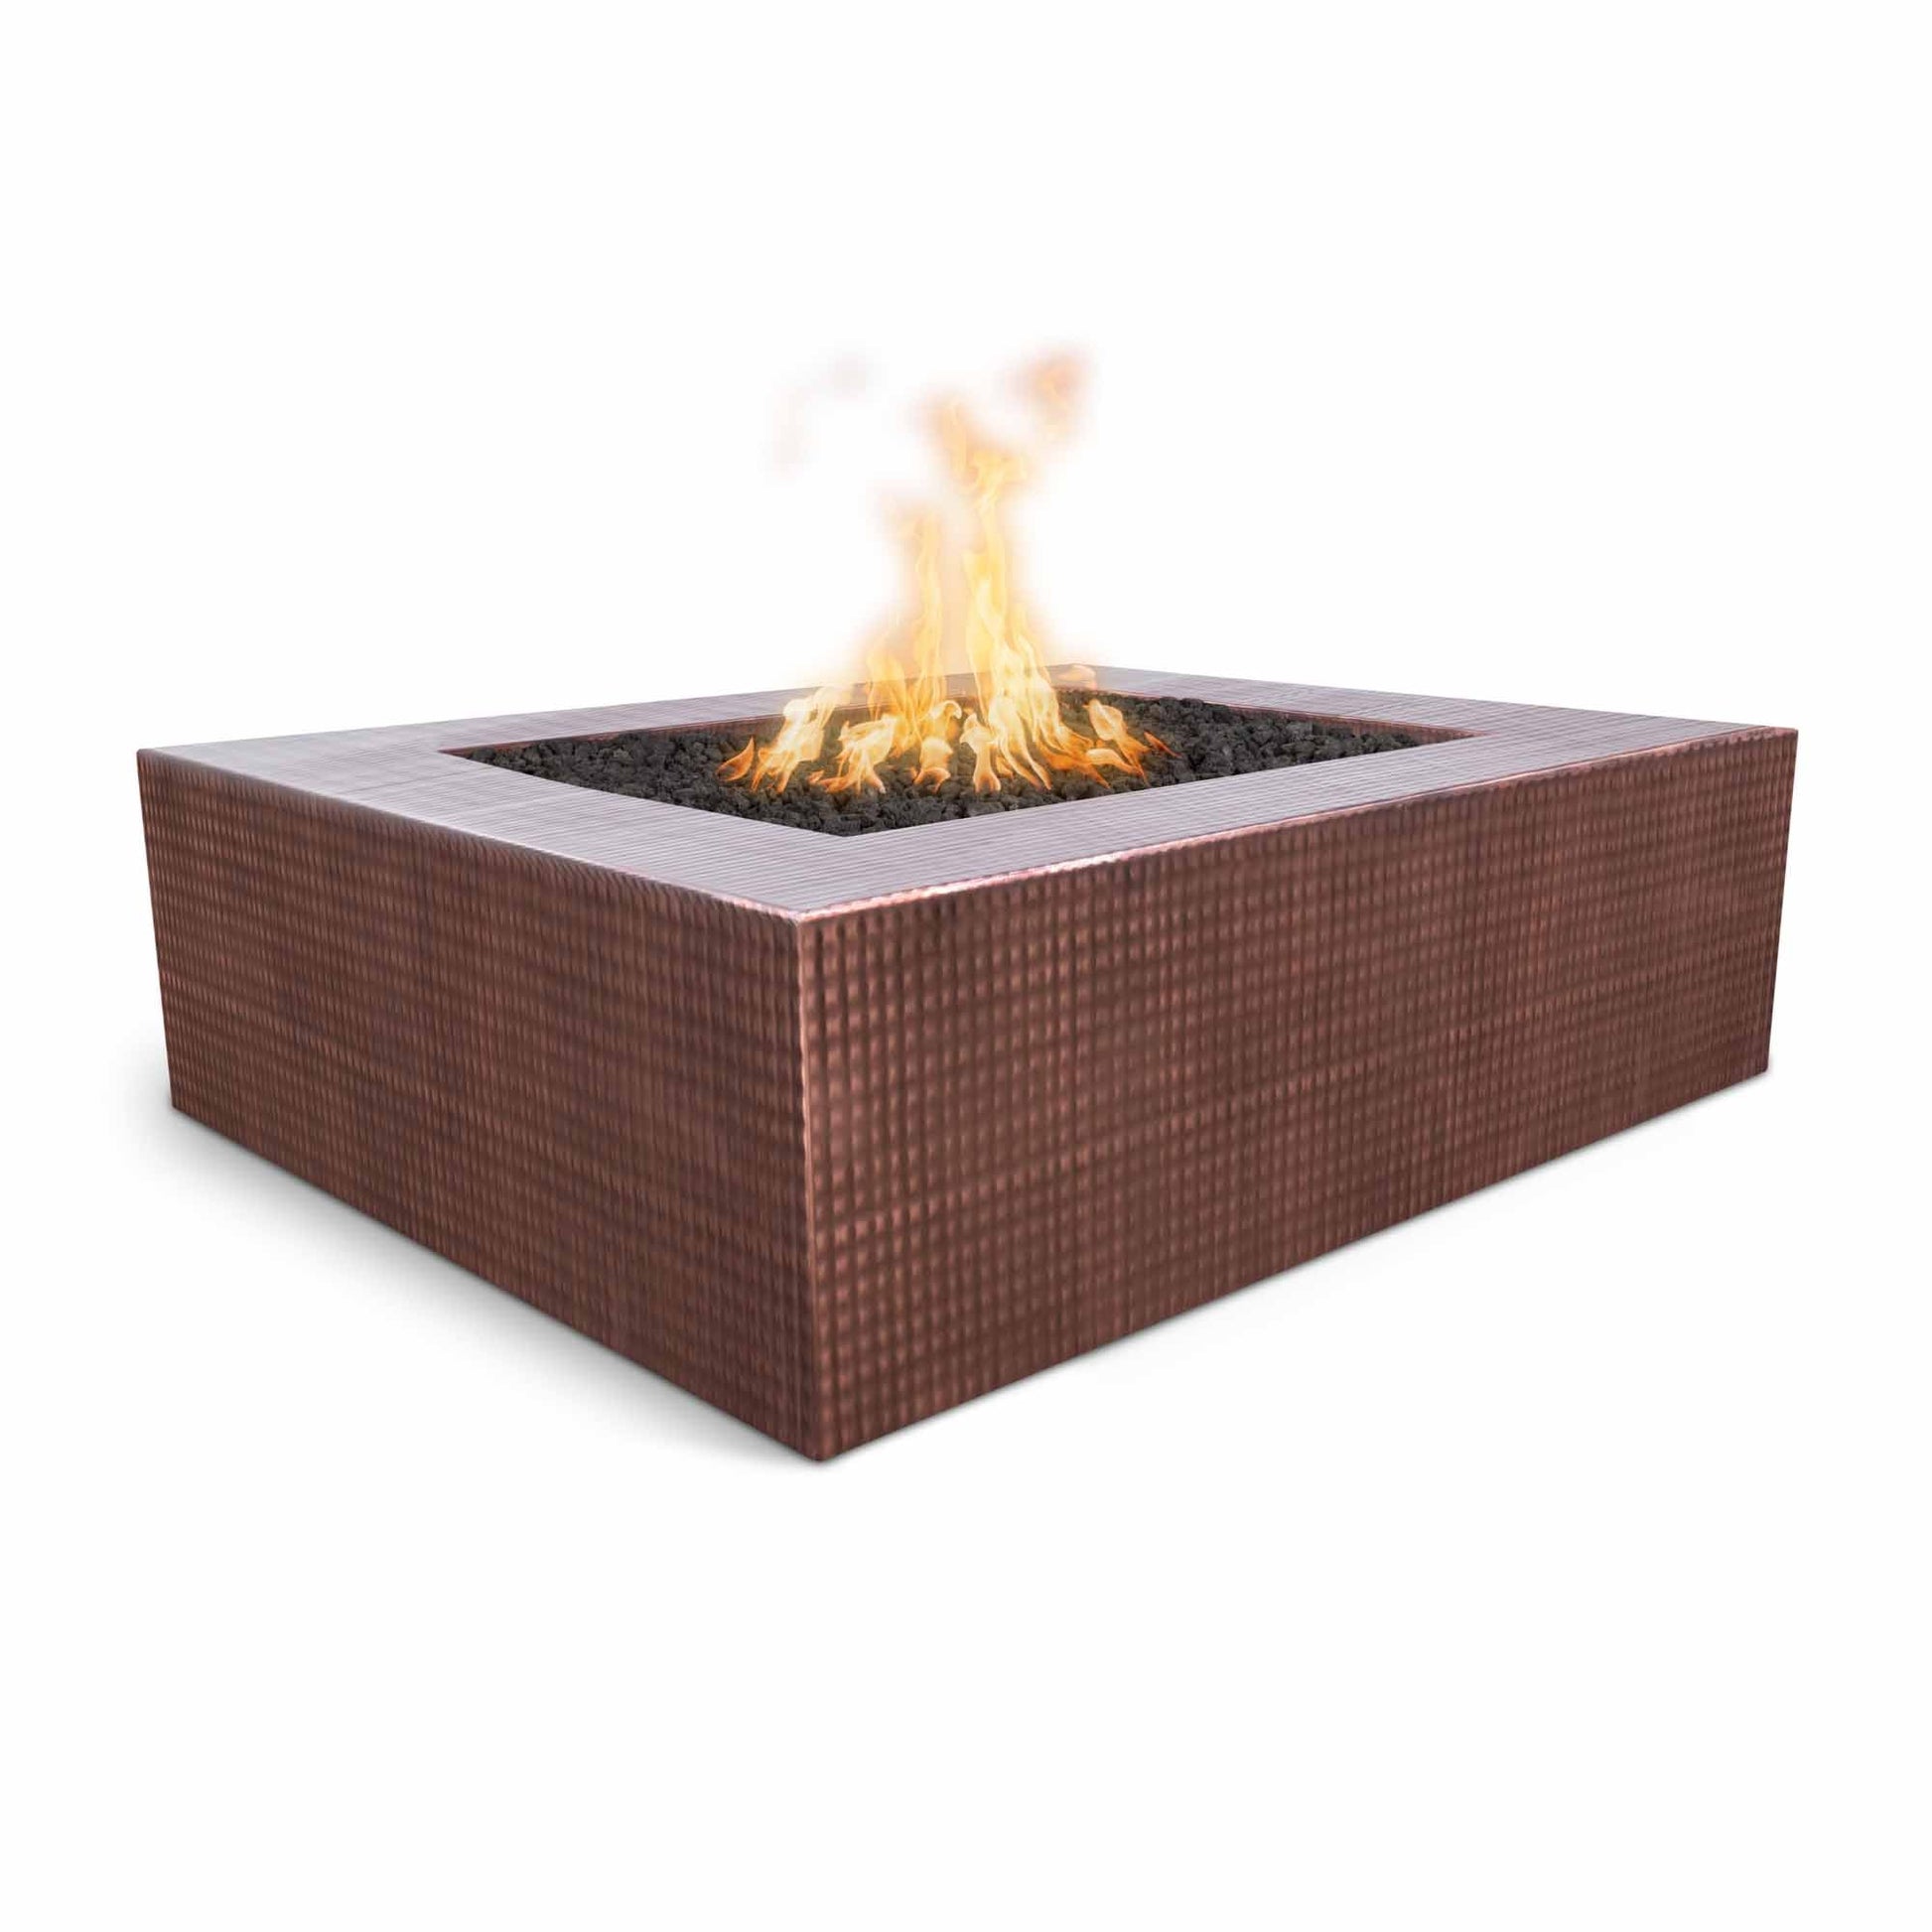 The Outdoor Plus Square Quad 36" Hammered Copper Natural Gas Fire Pit with 12V Electronic Ignition